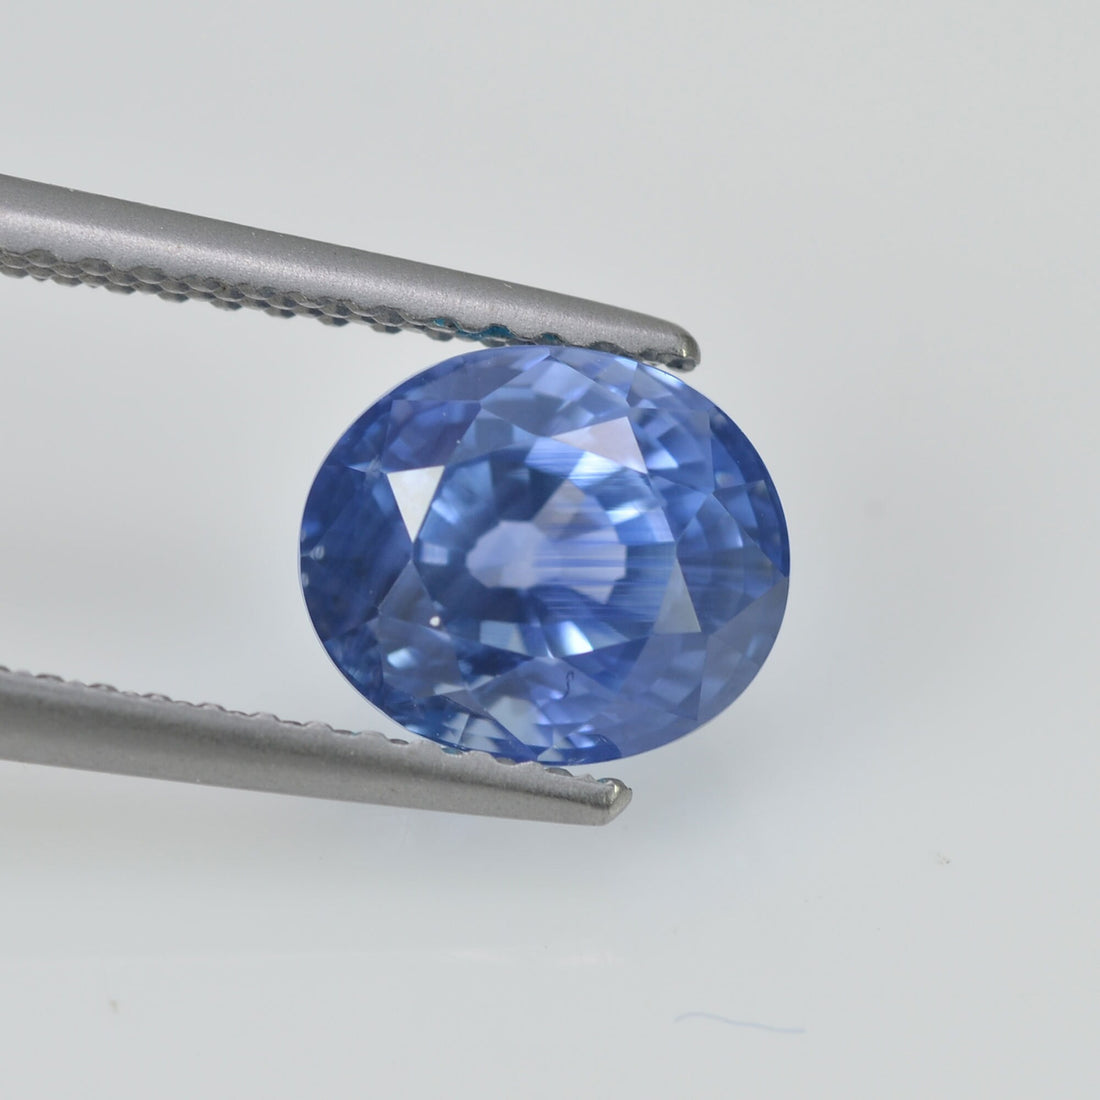 2.71 cts Natural Blue Sapphire Loose Gemstone Oval Cut